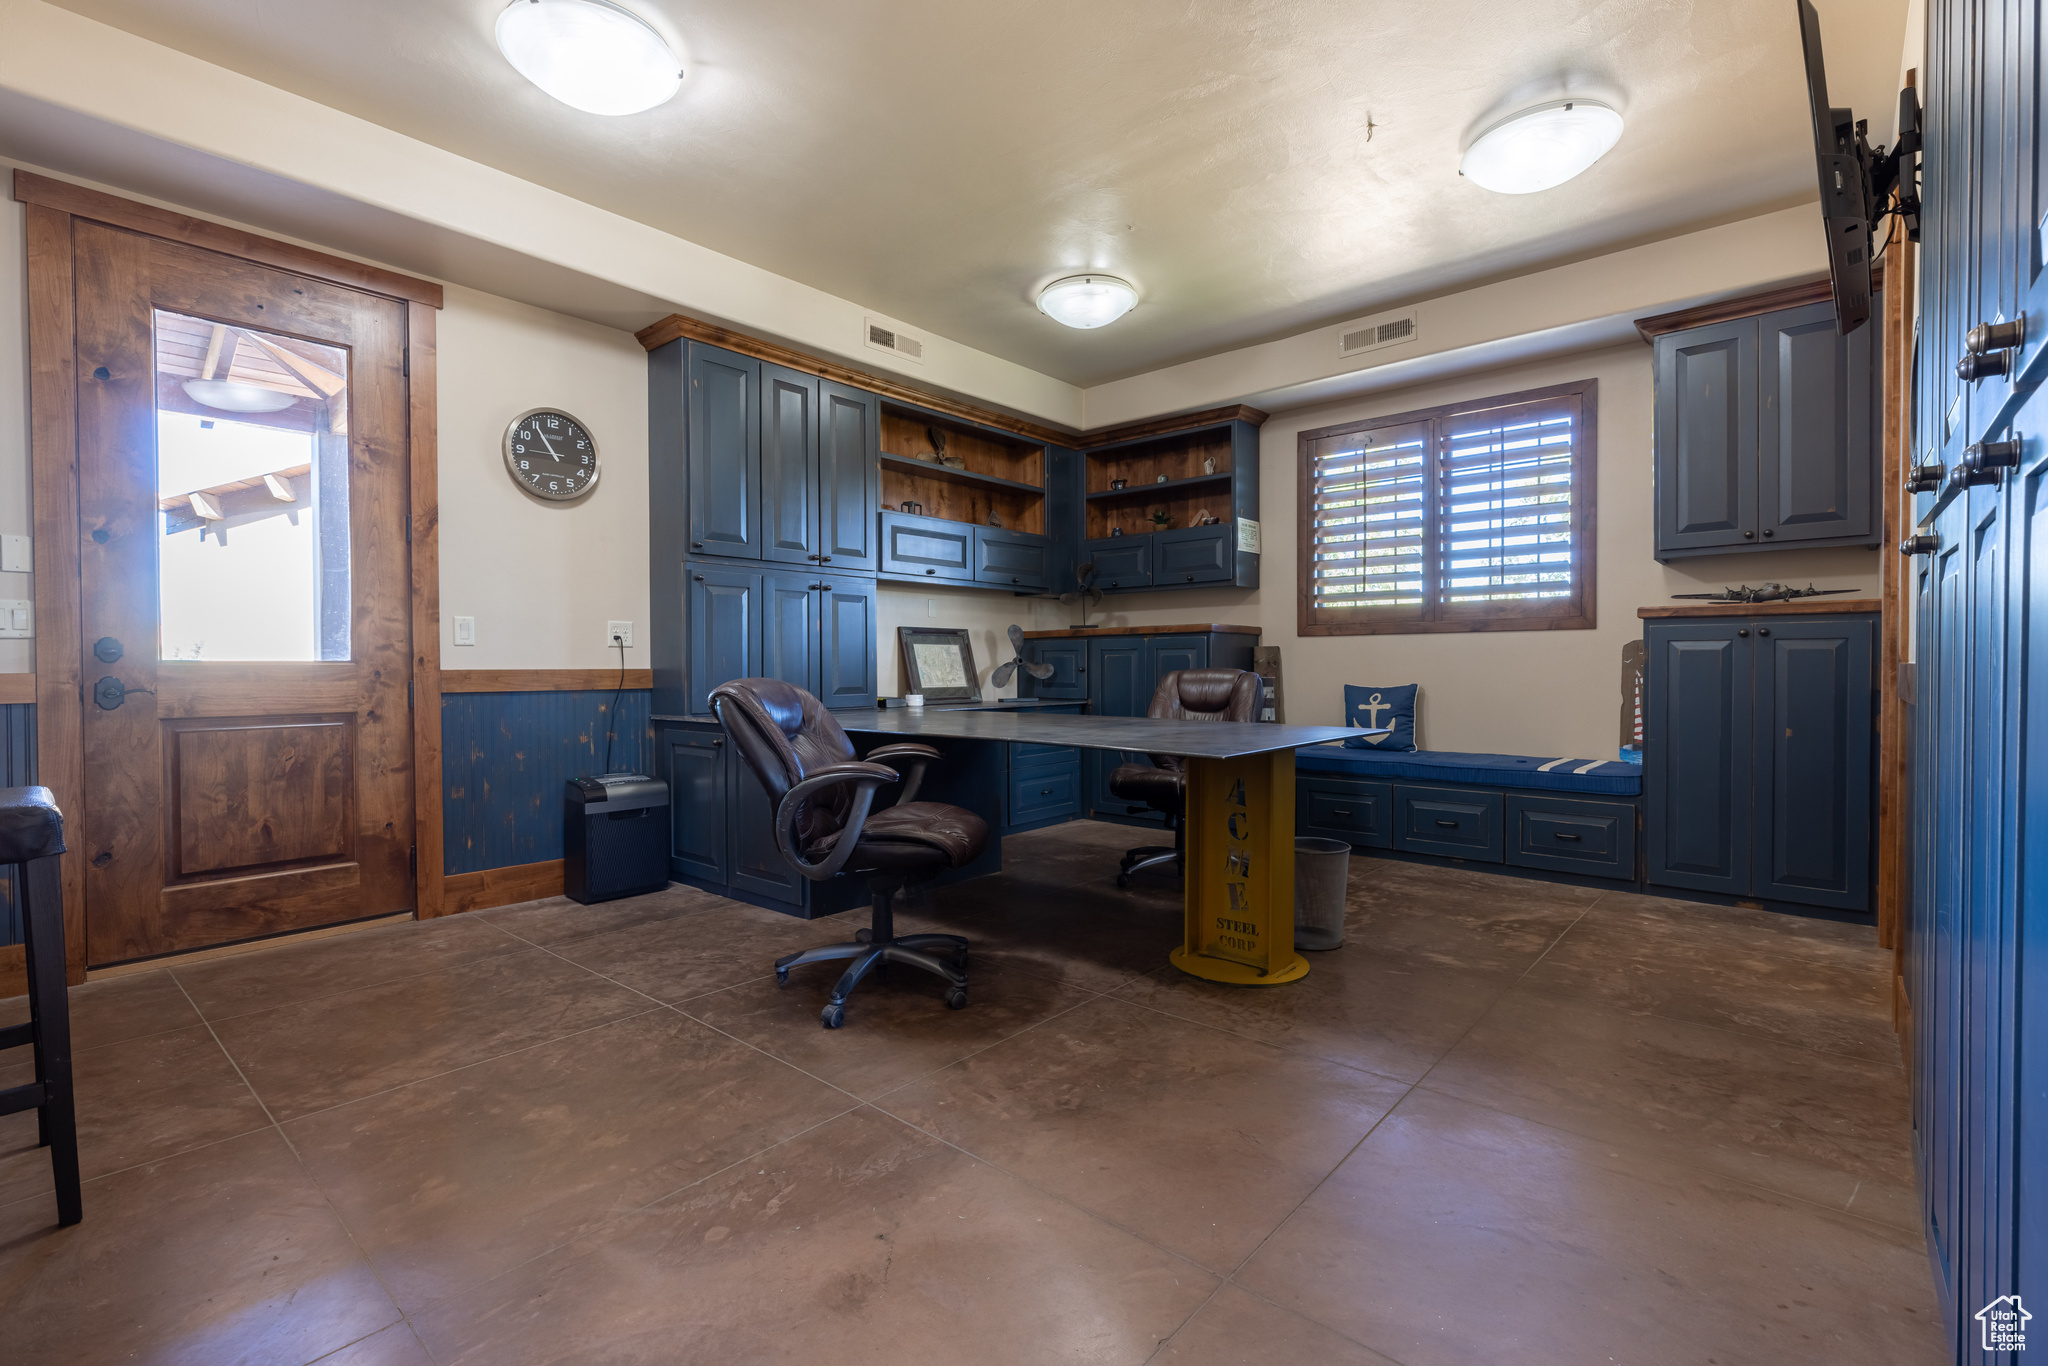 Home office featuring plenty of natural light and dark tile floors, buildt ins with a steel desk!